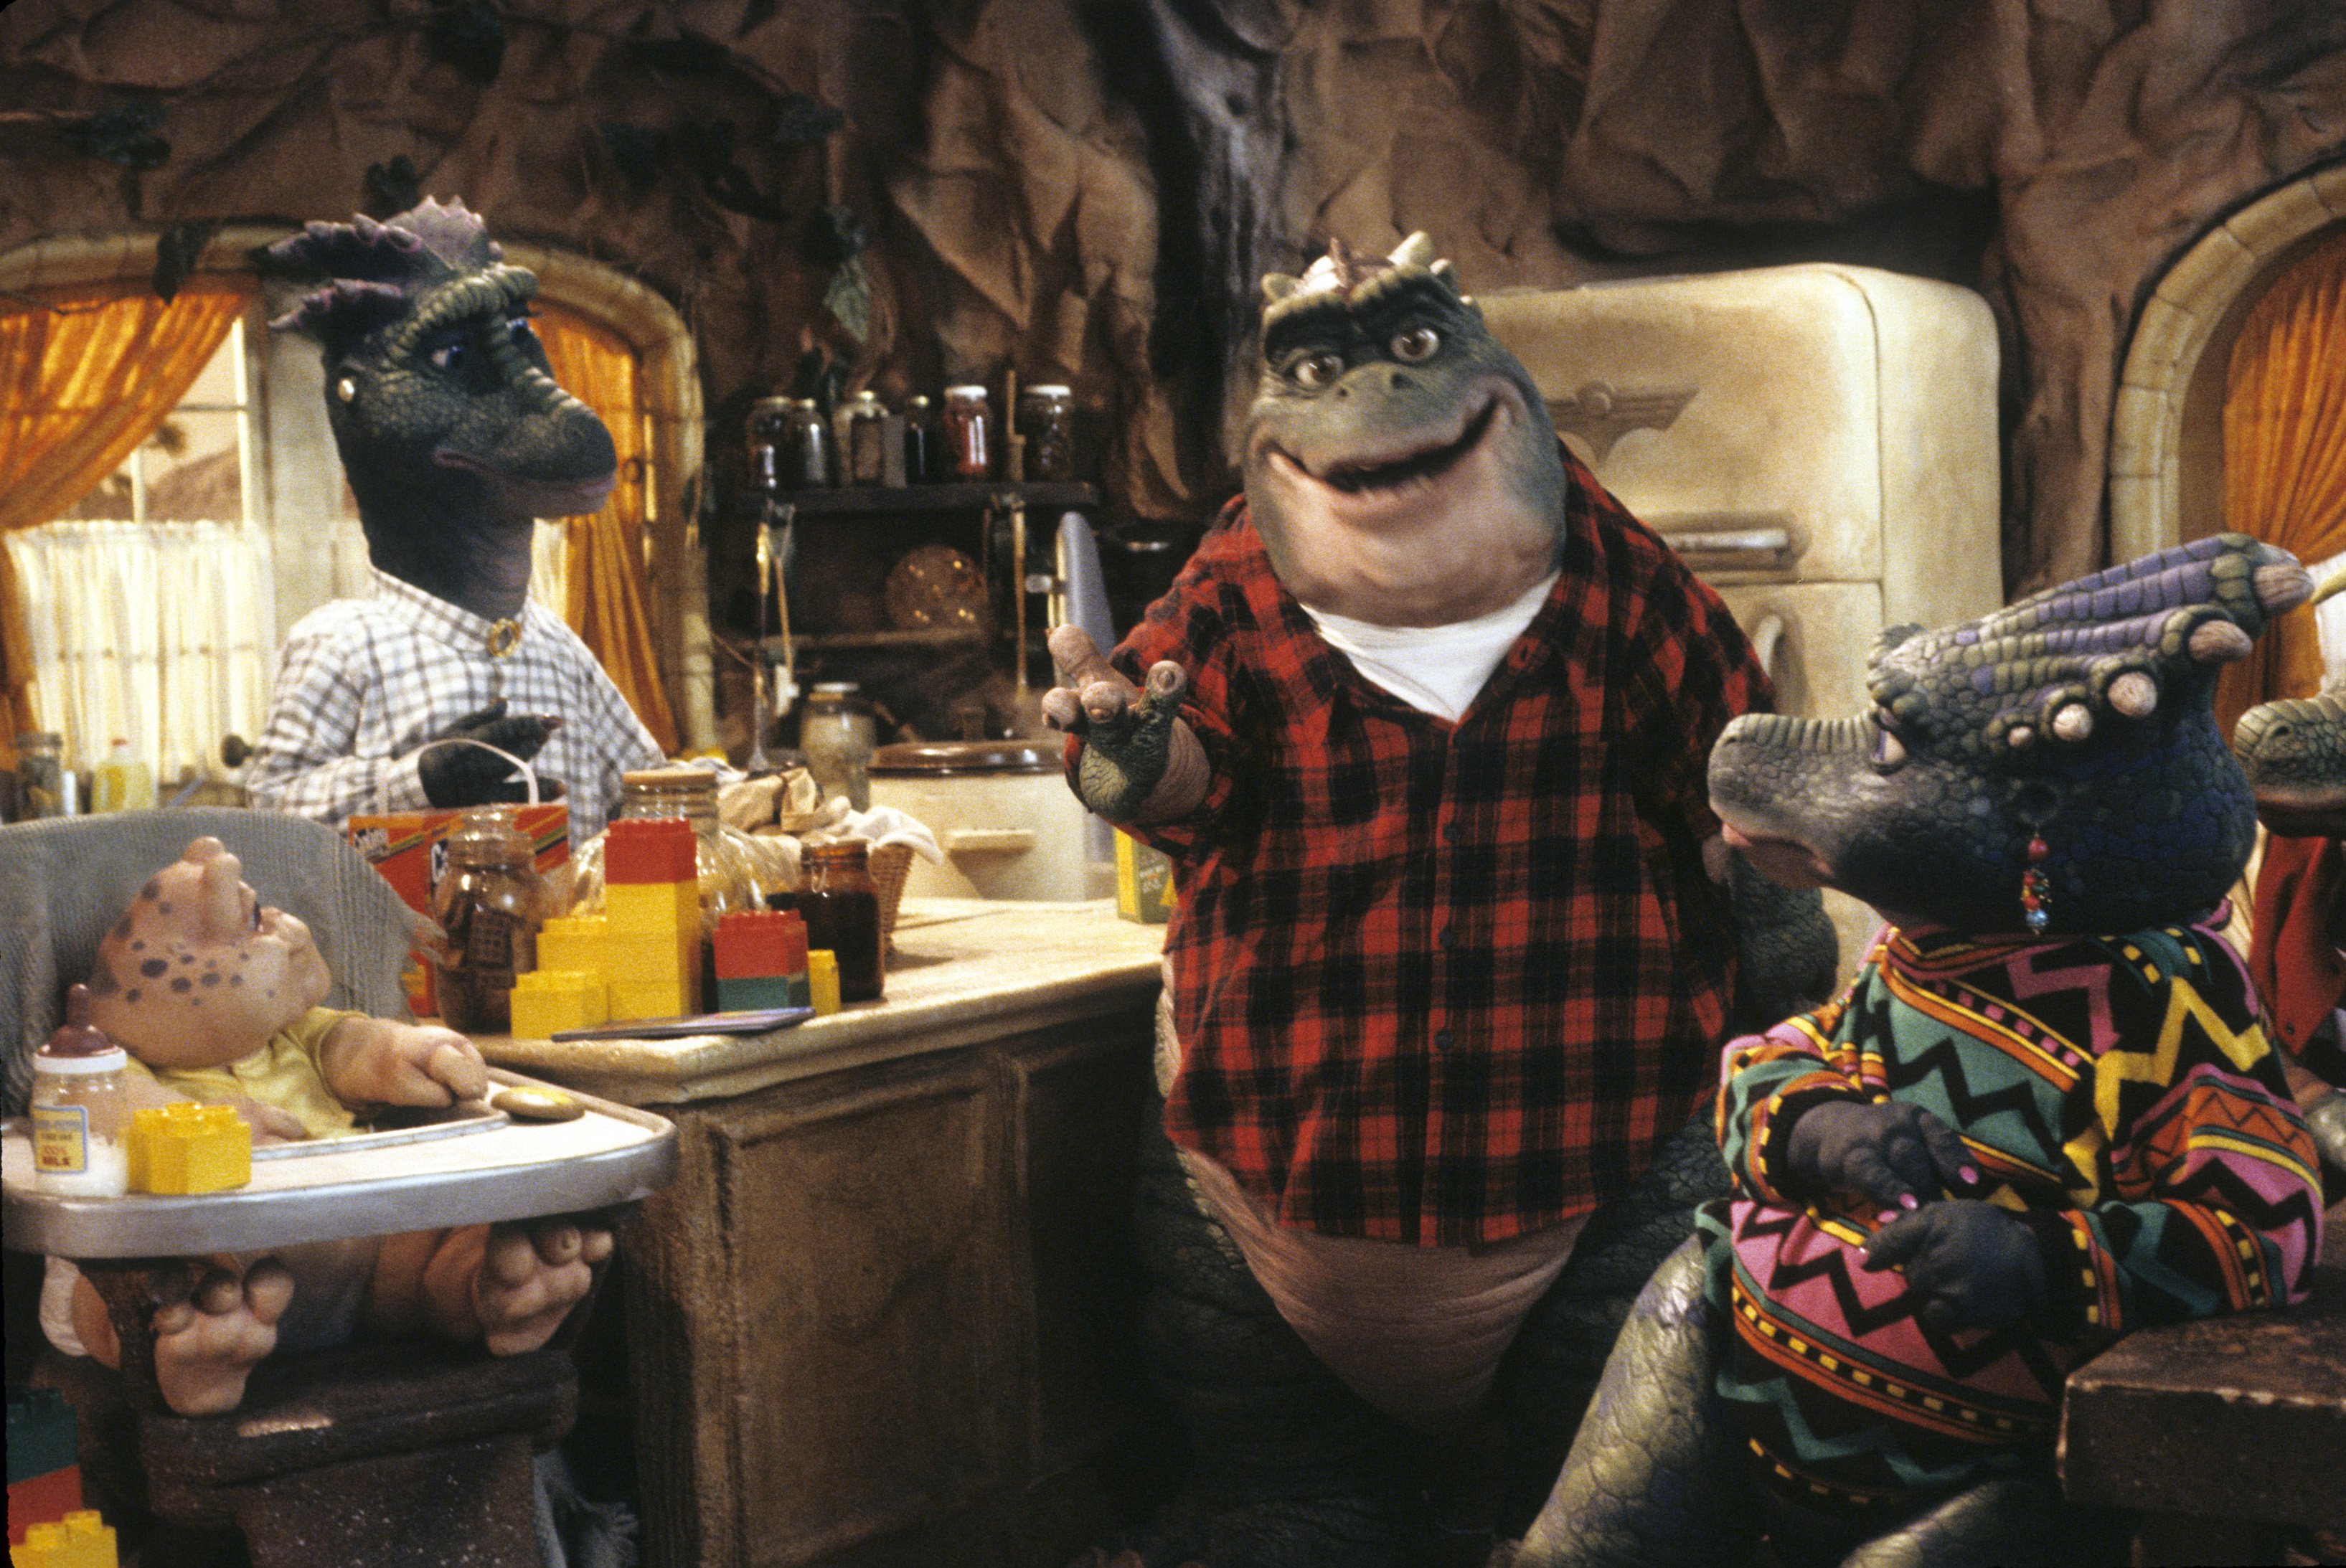 The Sinclair family of ABC's Dinosaurs rallied around the father, Earl.